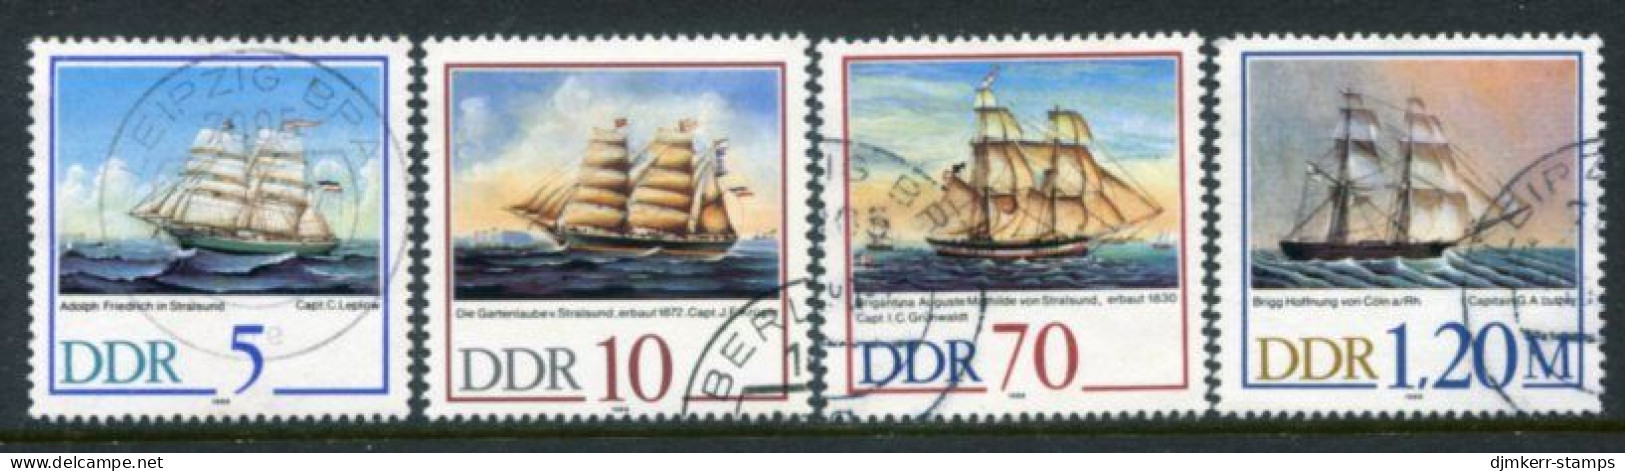 EAST GERMANY / DDR 1988 Sailing Ships Used .  Michel 3198-201 - Oblitérés